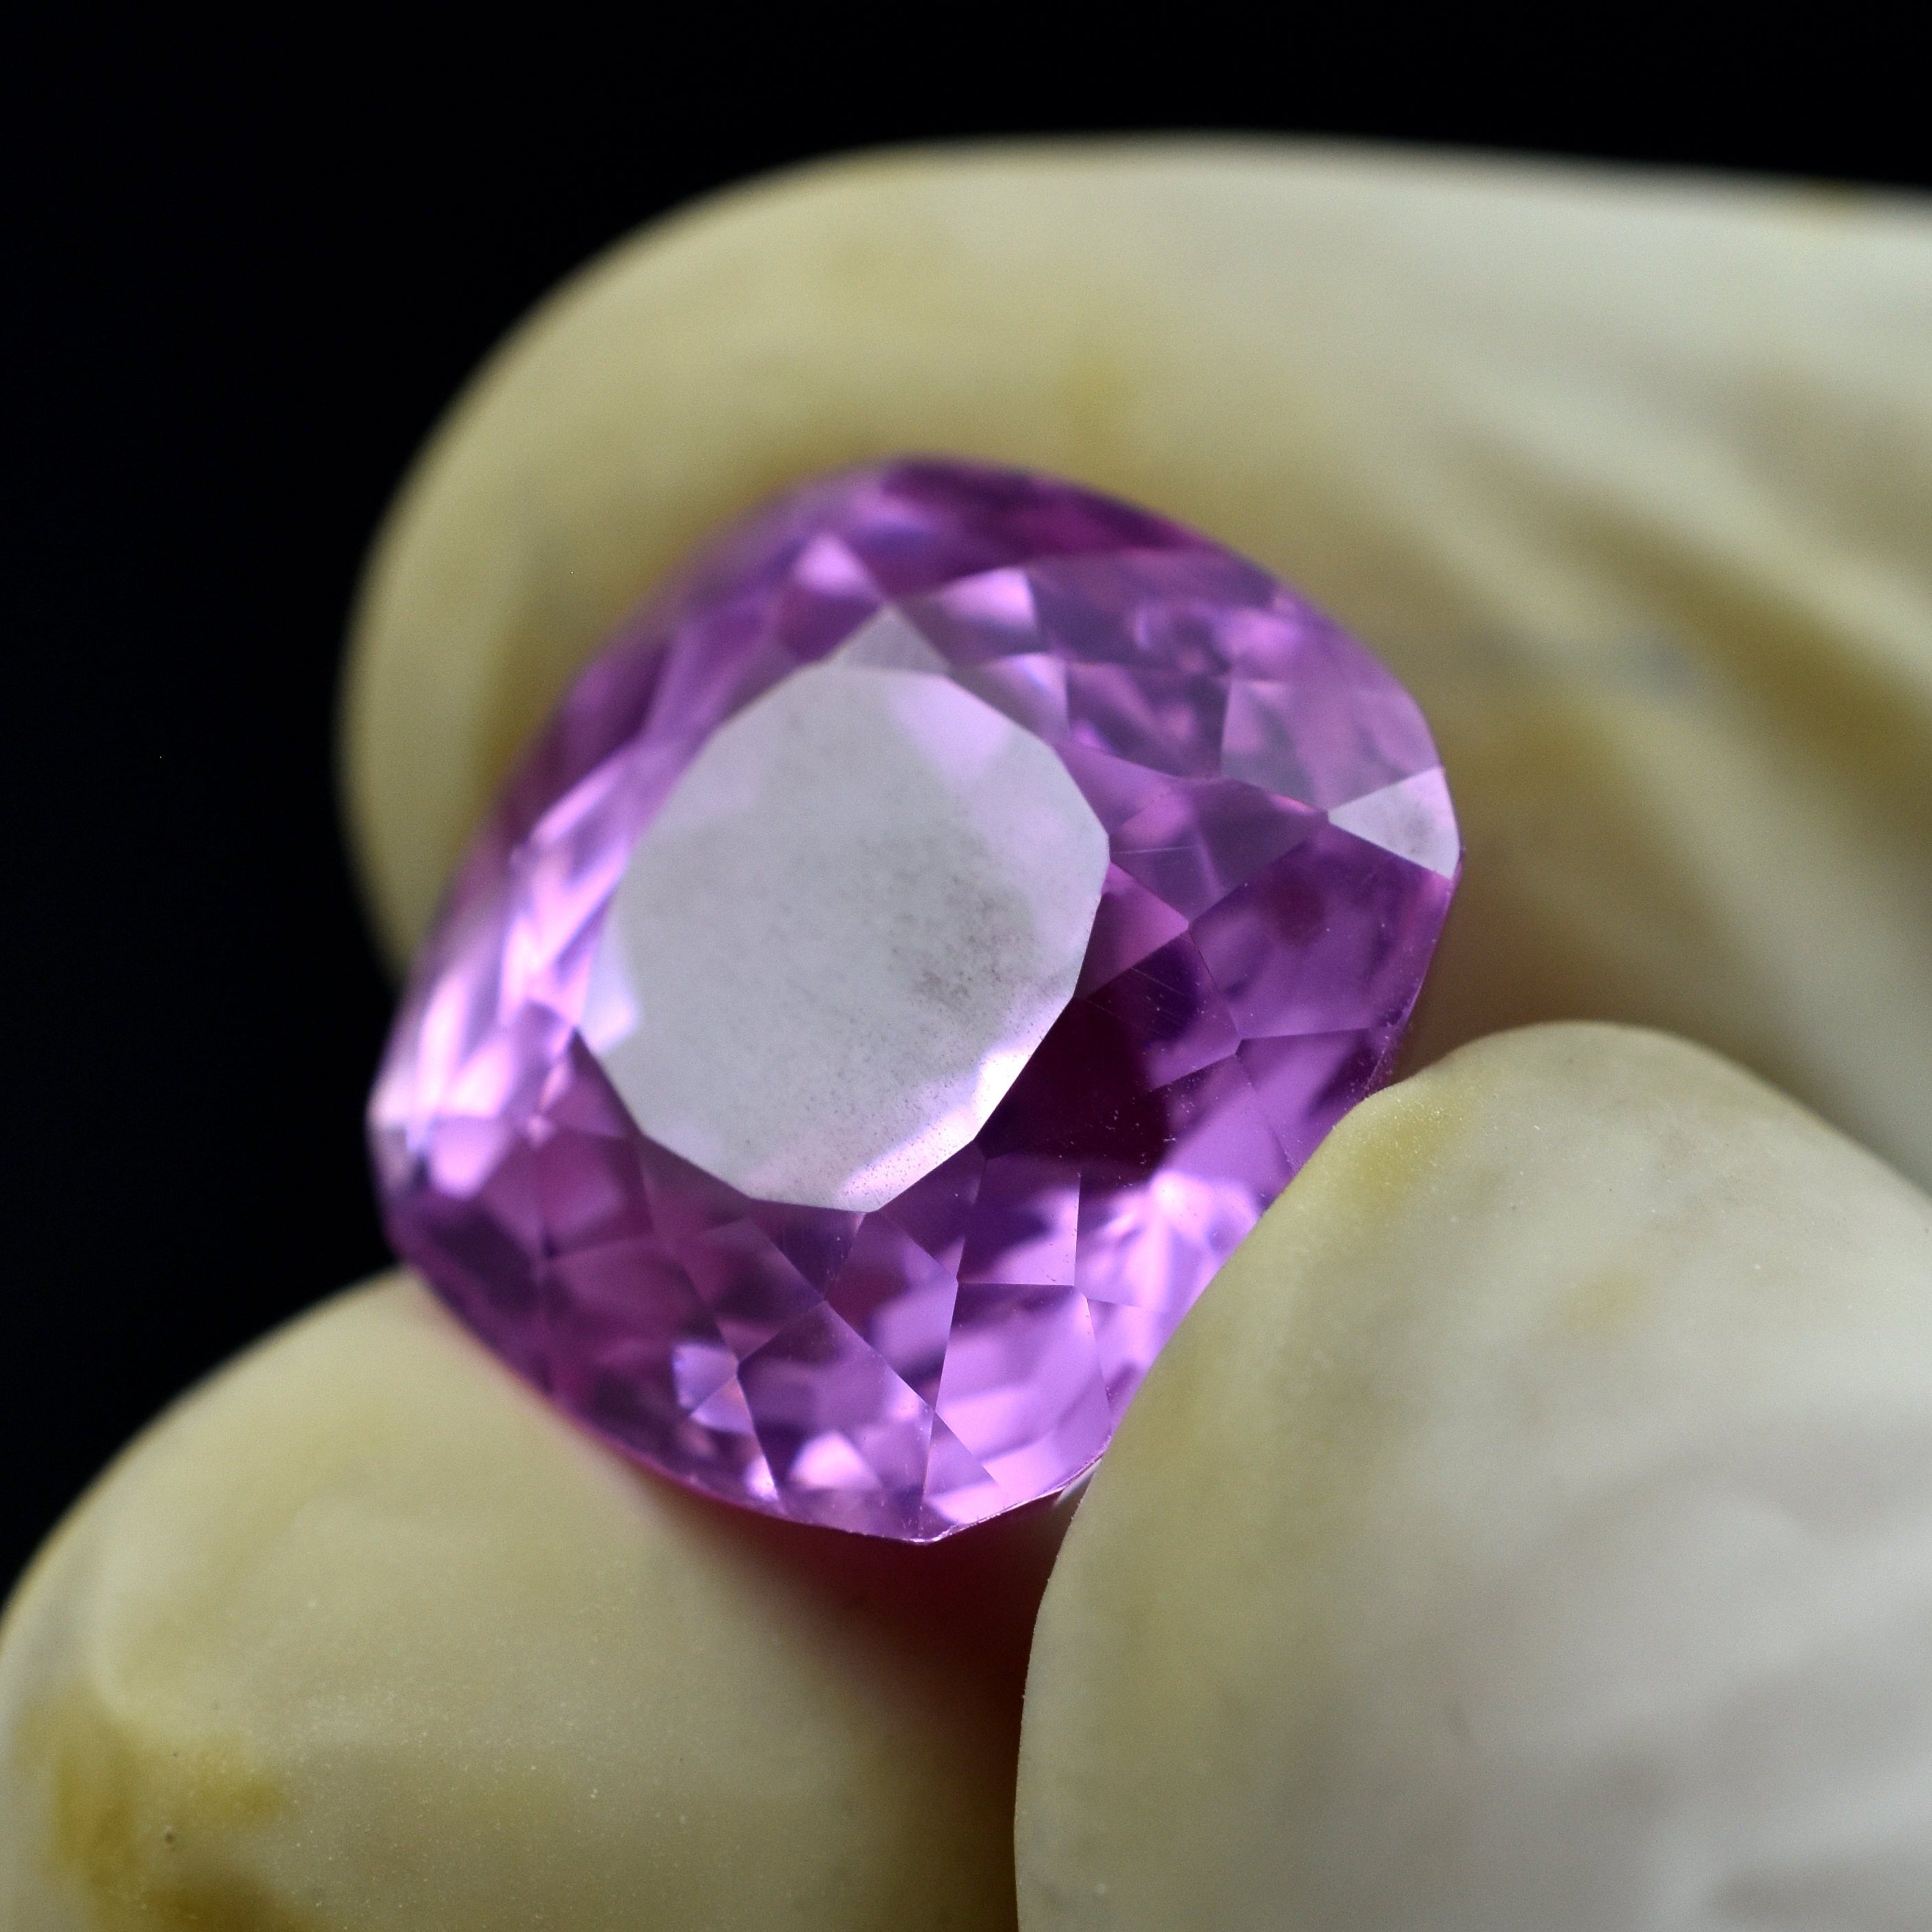 Sapphire From Sri Lanka 11.35 Carat Natural Flawless Ceylon Pink Sapphire Certified Square Cushion Shape Loose Gemstone Most Genuine Sapphire For Jewelry Making Gemstone Natural Pink Sapphire Stone